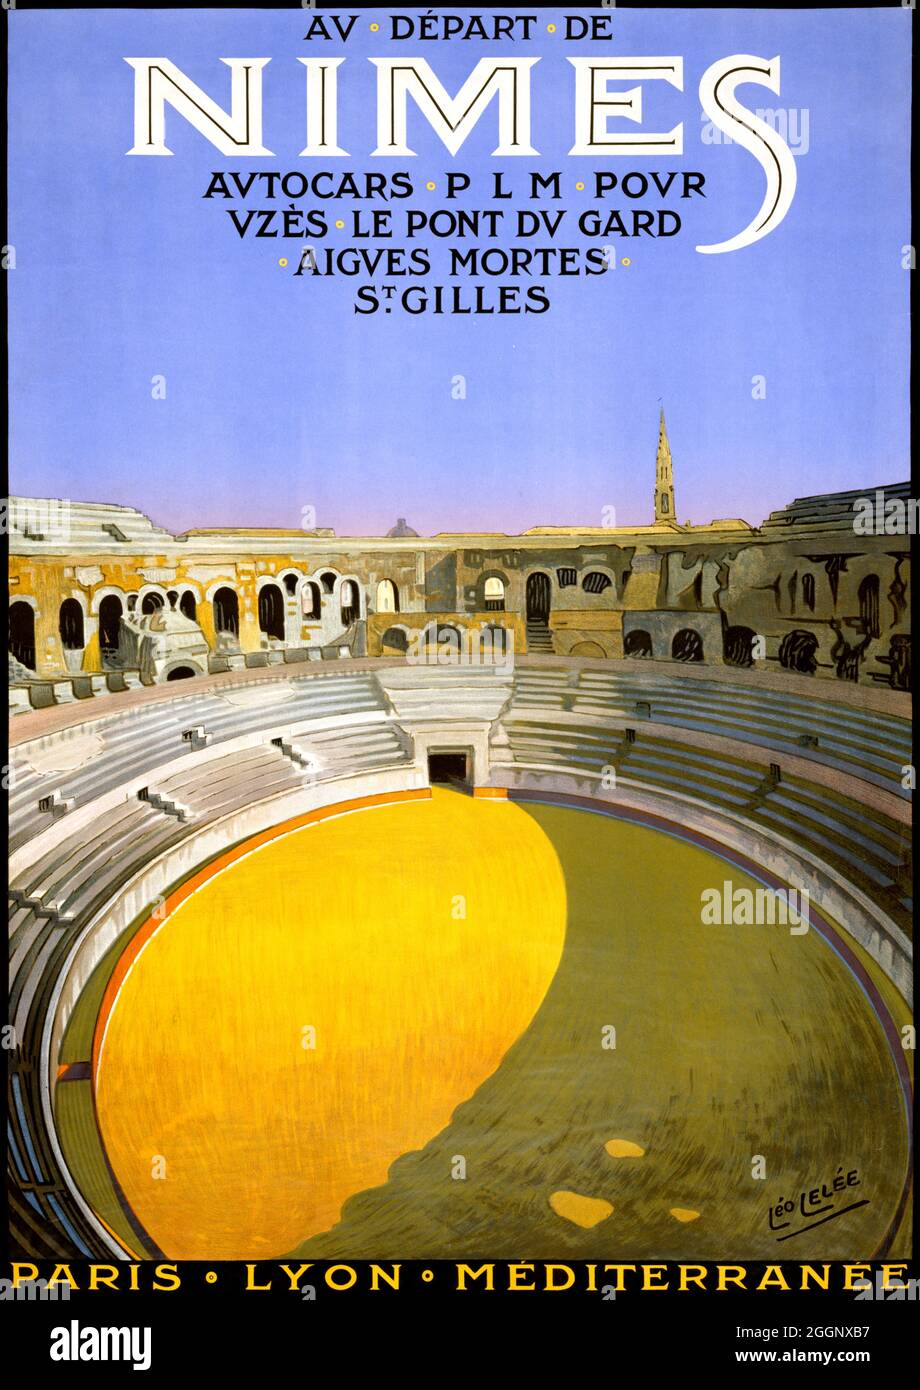 Nimes by Léo Lelée (1872-1947). Restored vintage poster published in 1926 in France. Stock Photo